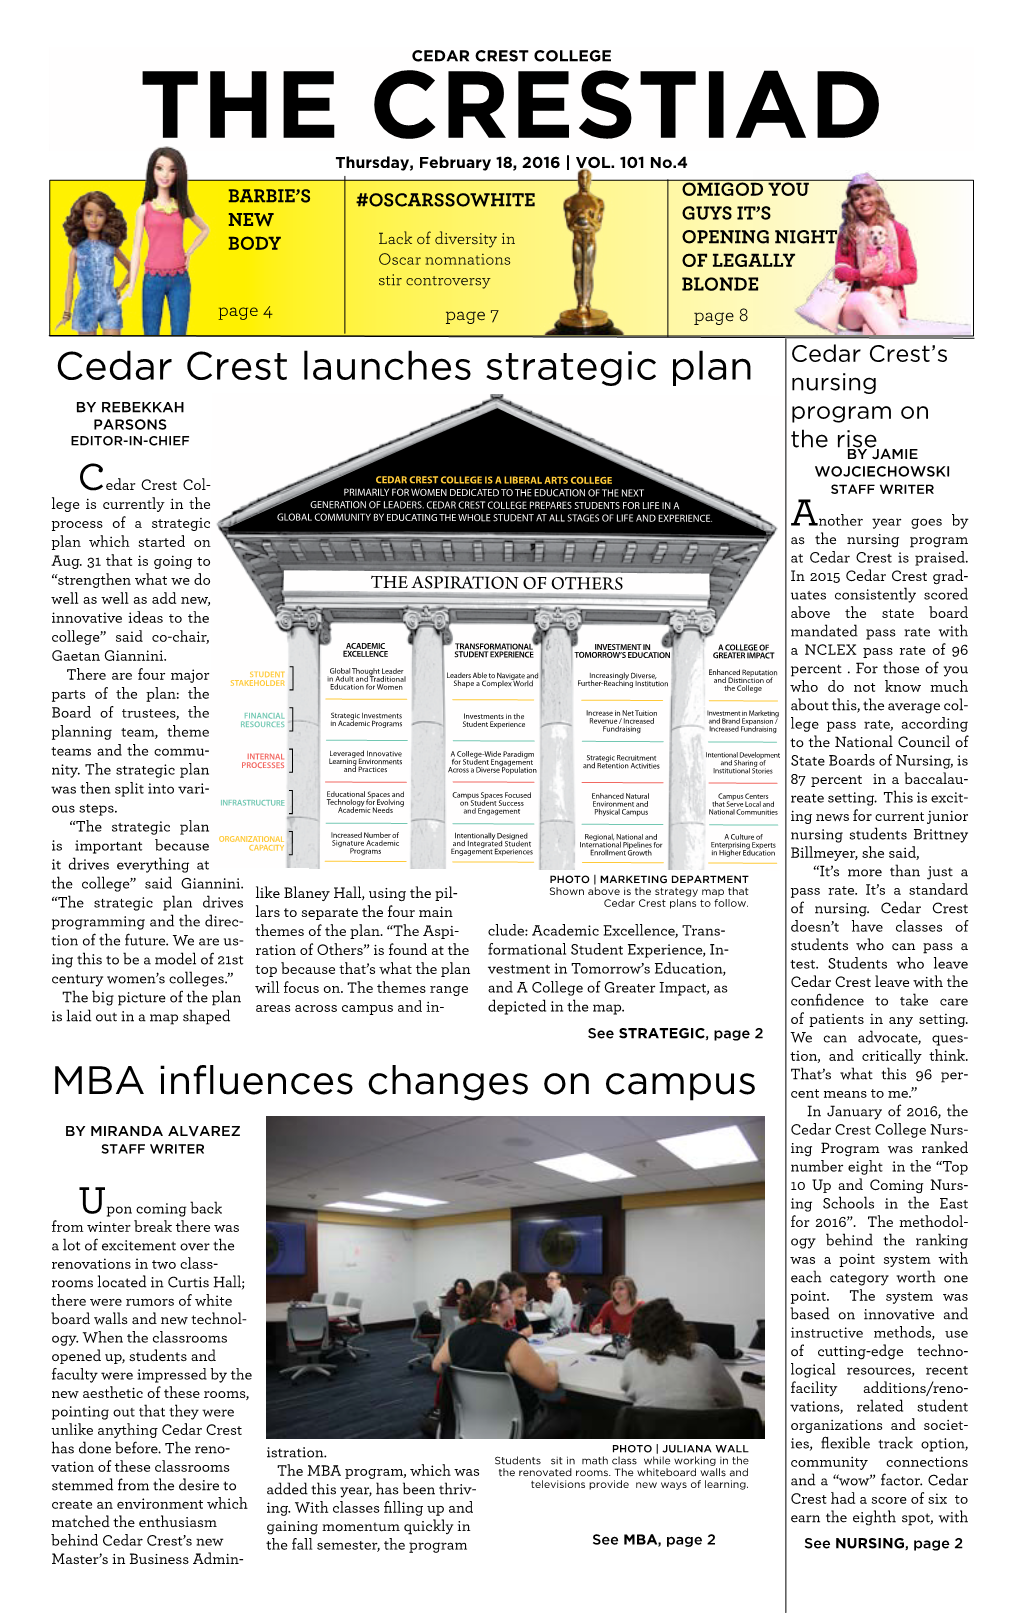 Cedar Crest Launches Strategic Plan MBA Influences Changes on Campus